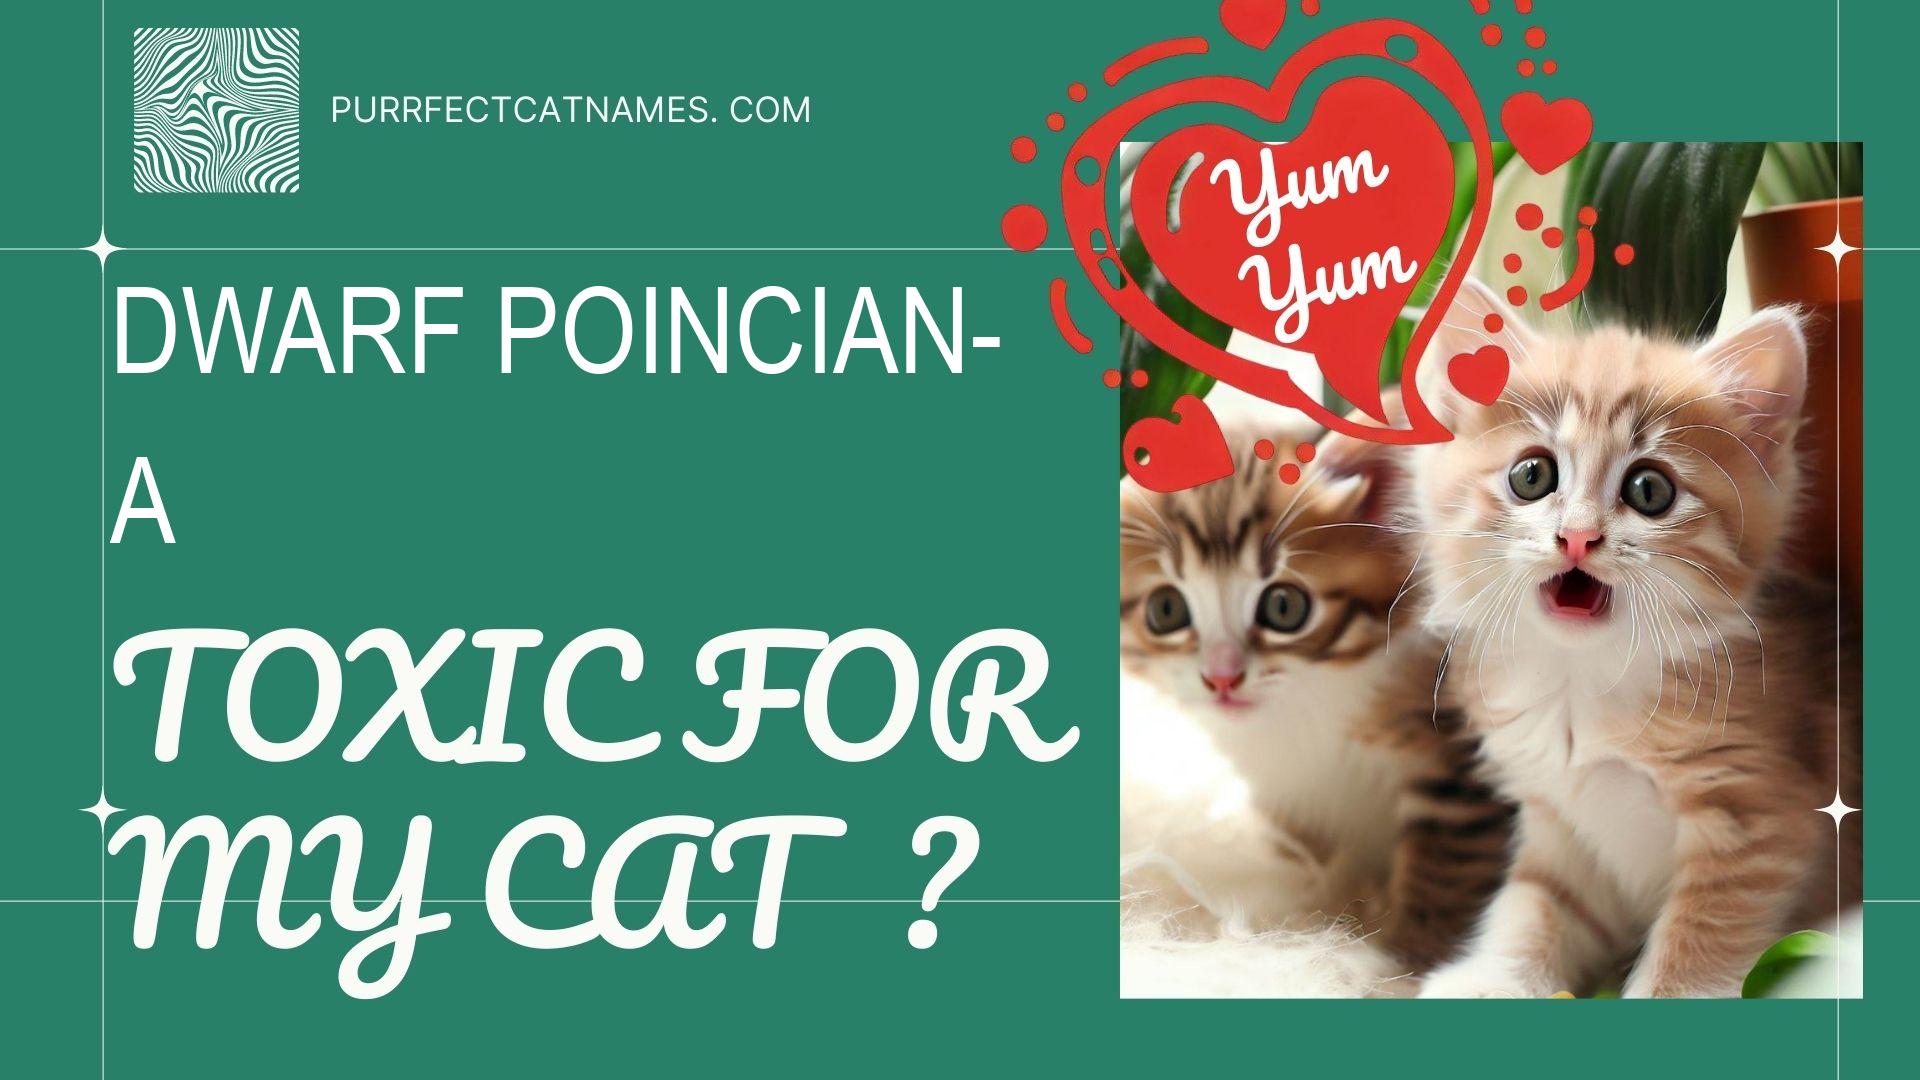 IsDwarf Poinciana plant toxic for your cat